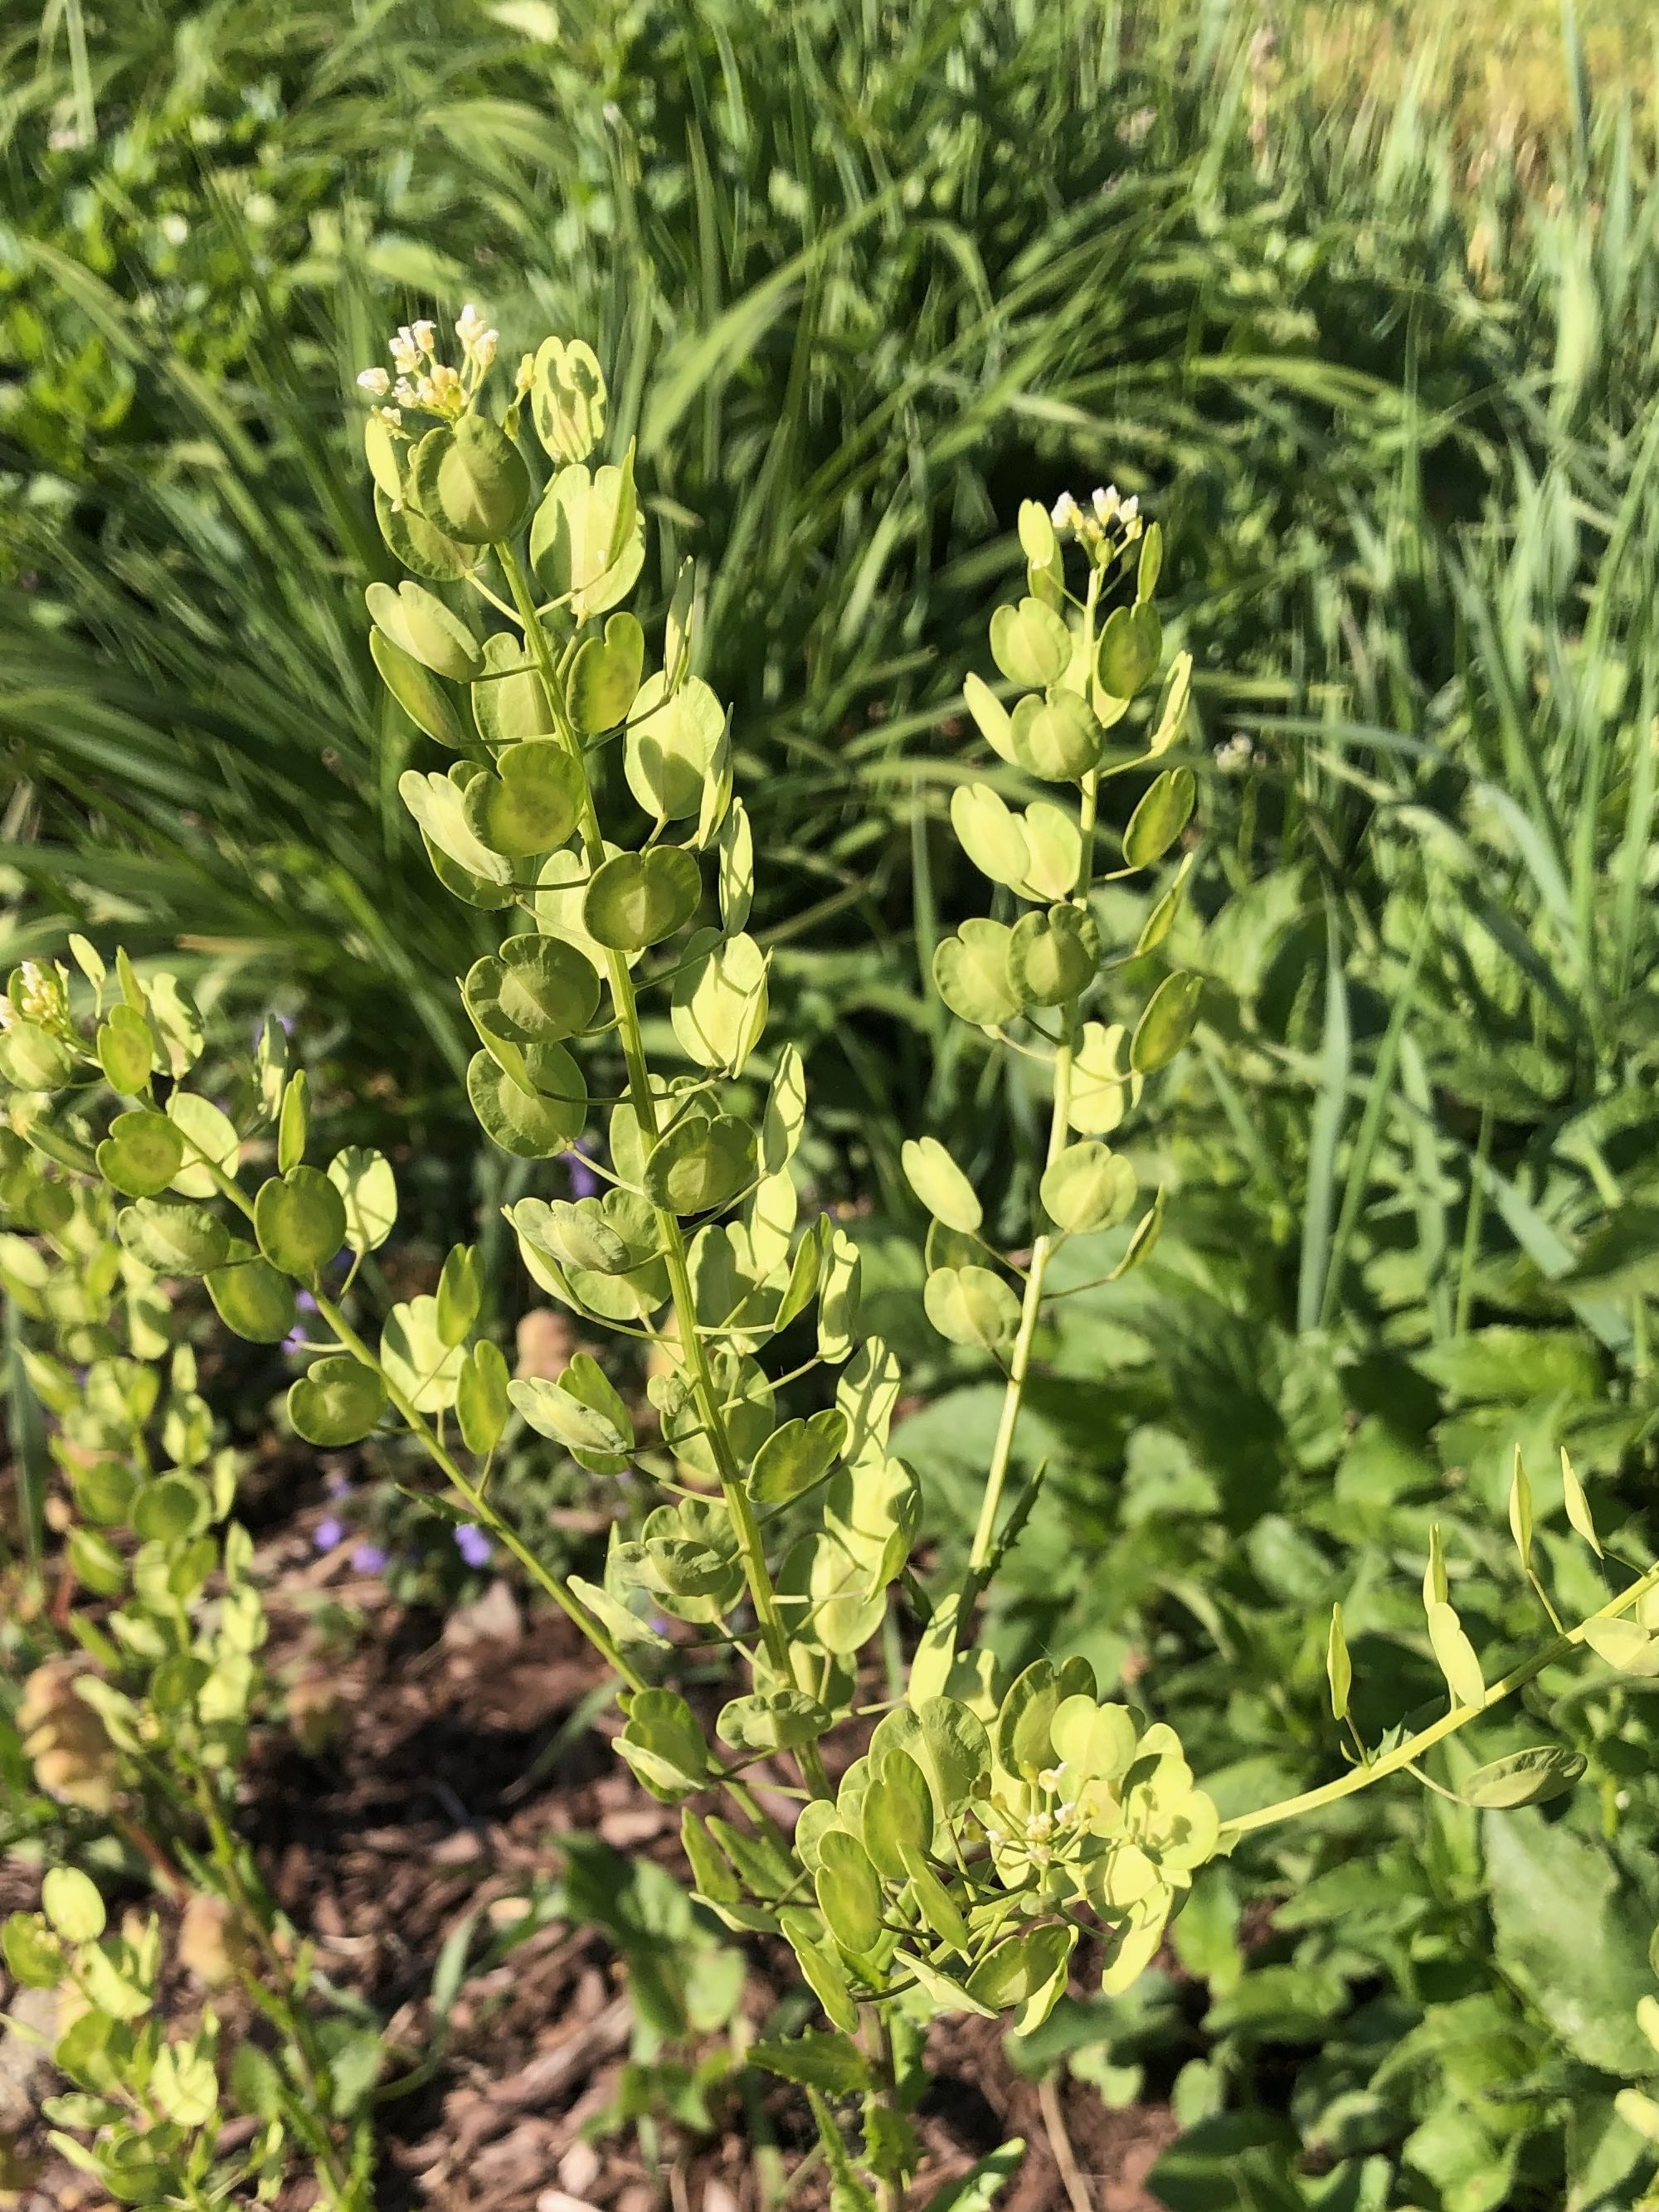 Field Pennycress near retaining pond on corner of Manitou Way and Nakoma Road in Madison, Wisconsin on May 14, 2021.